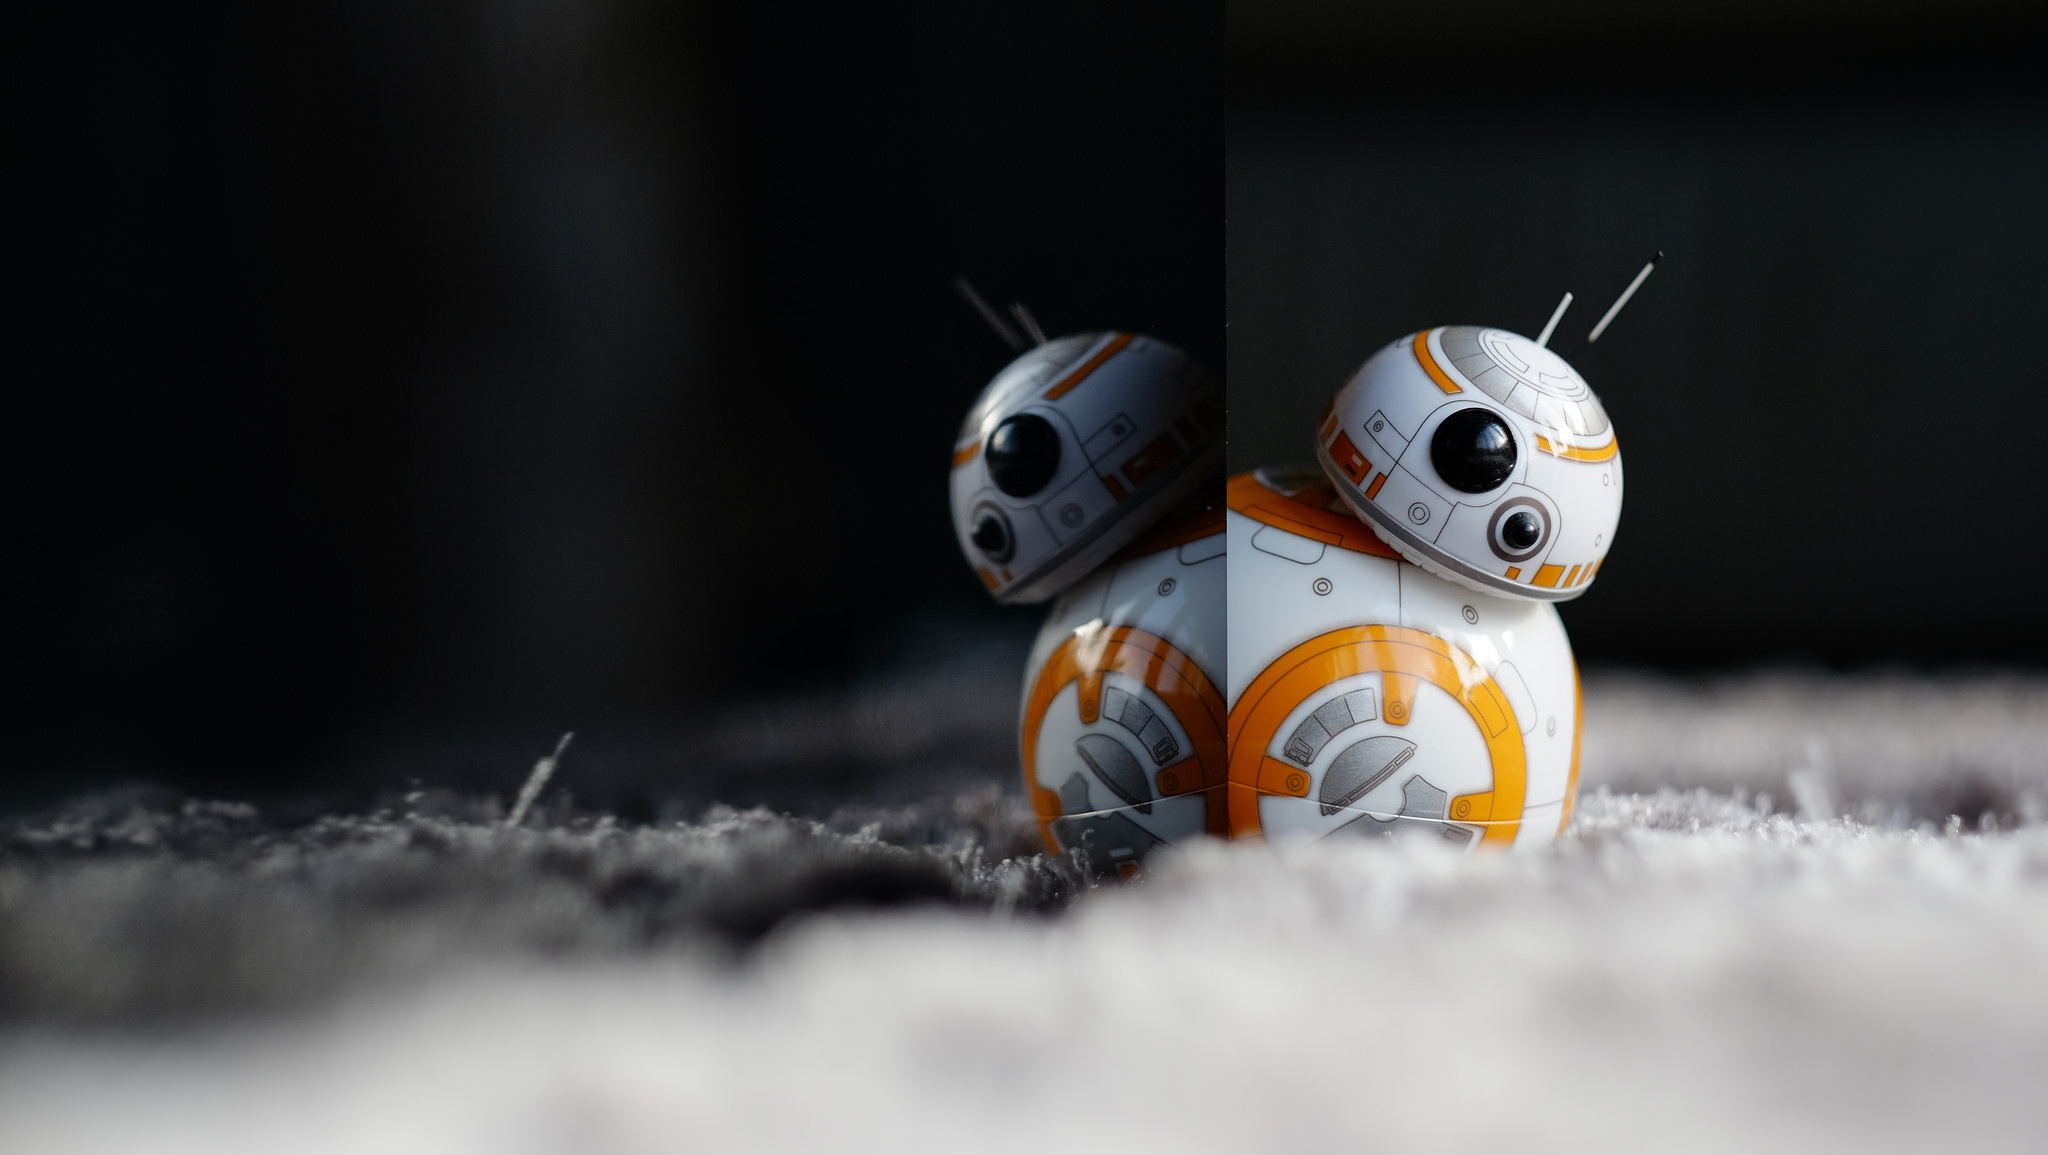 man made, toy, bb 8, droid, reflection, star wars